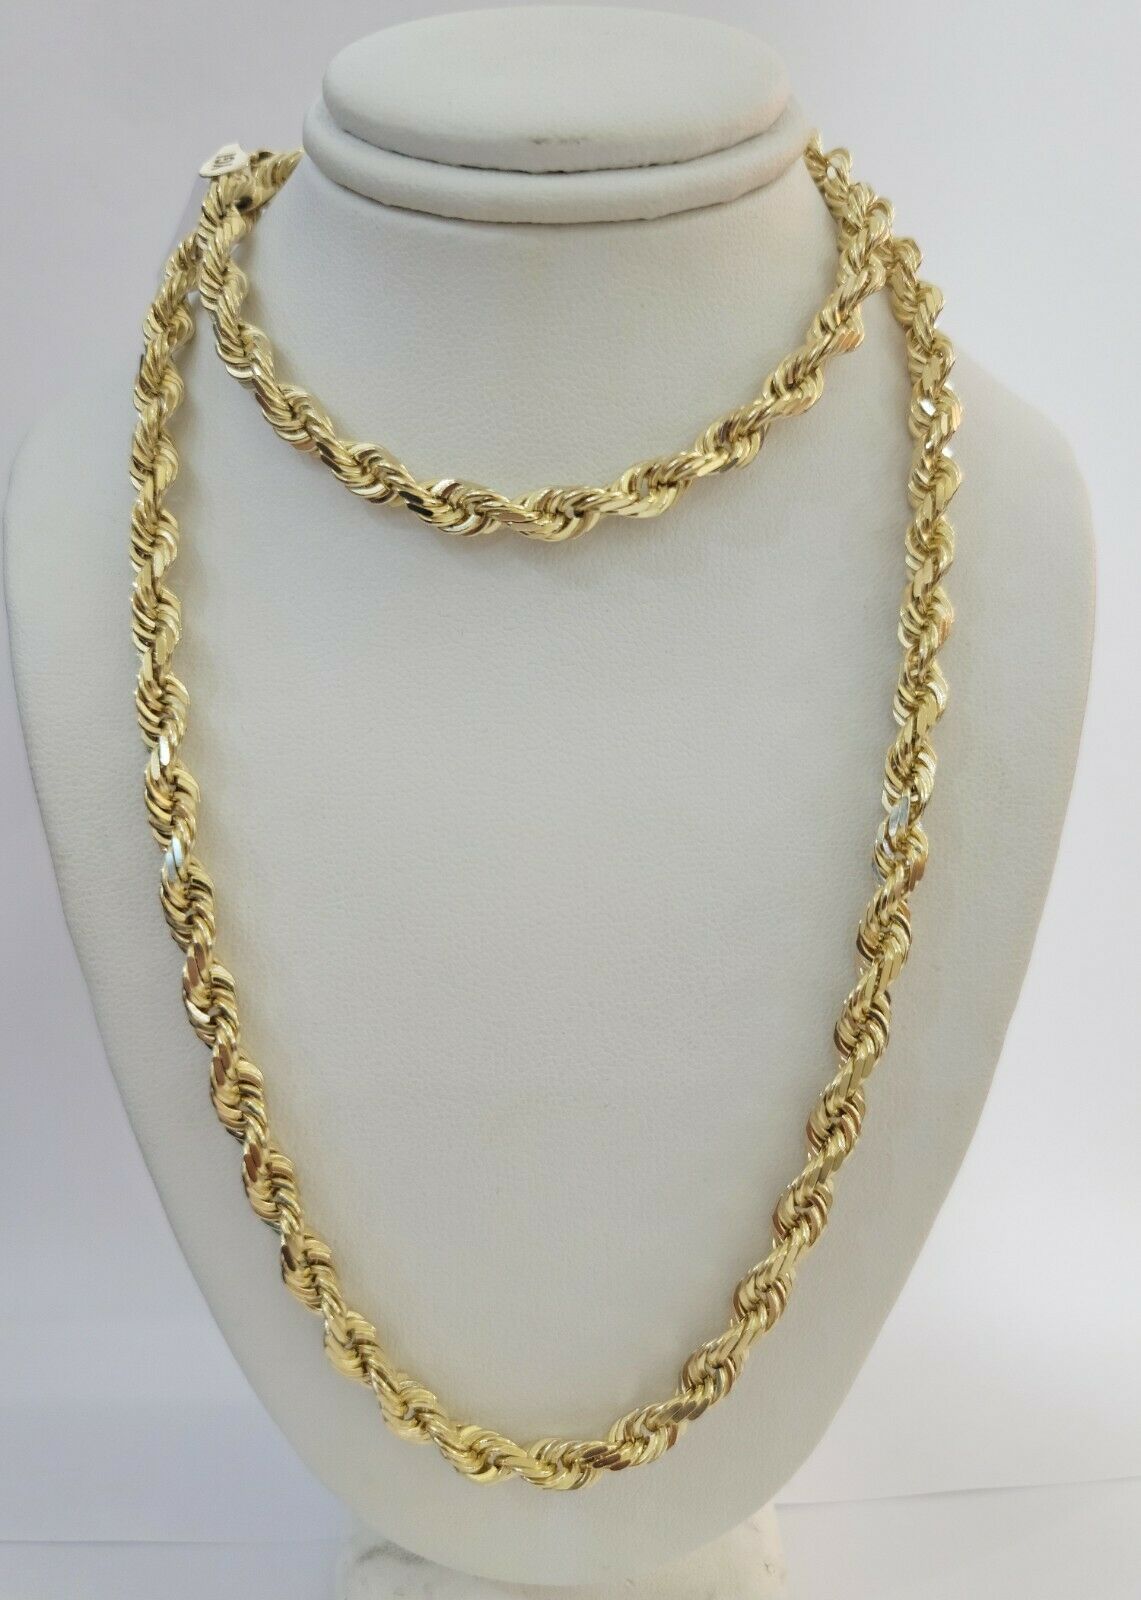 Real 14K Gold Rope Chain Solid Necklace 6mm 26 inch Men Women, 14kt Yellow Gold